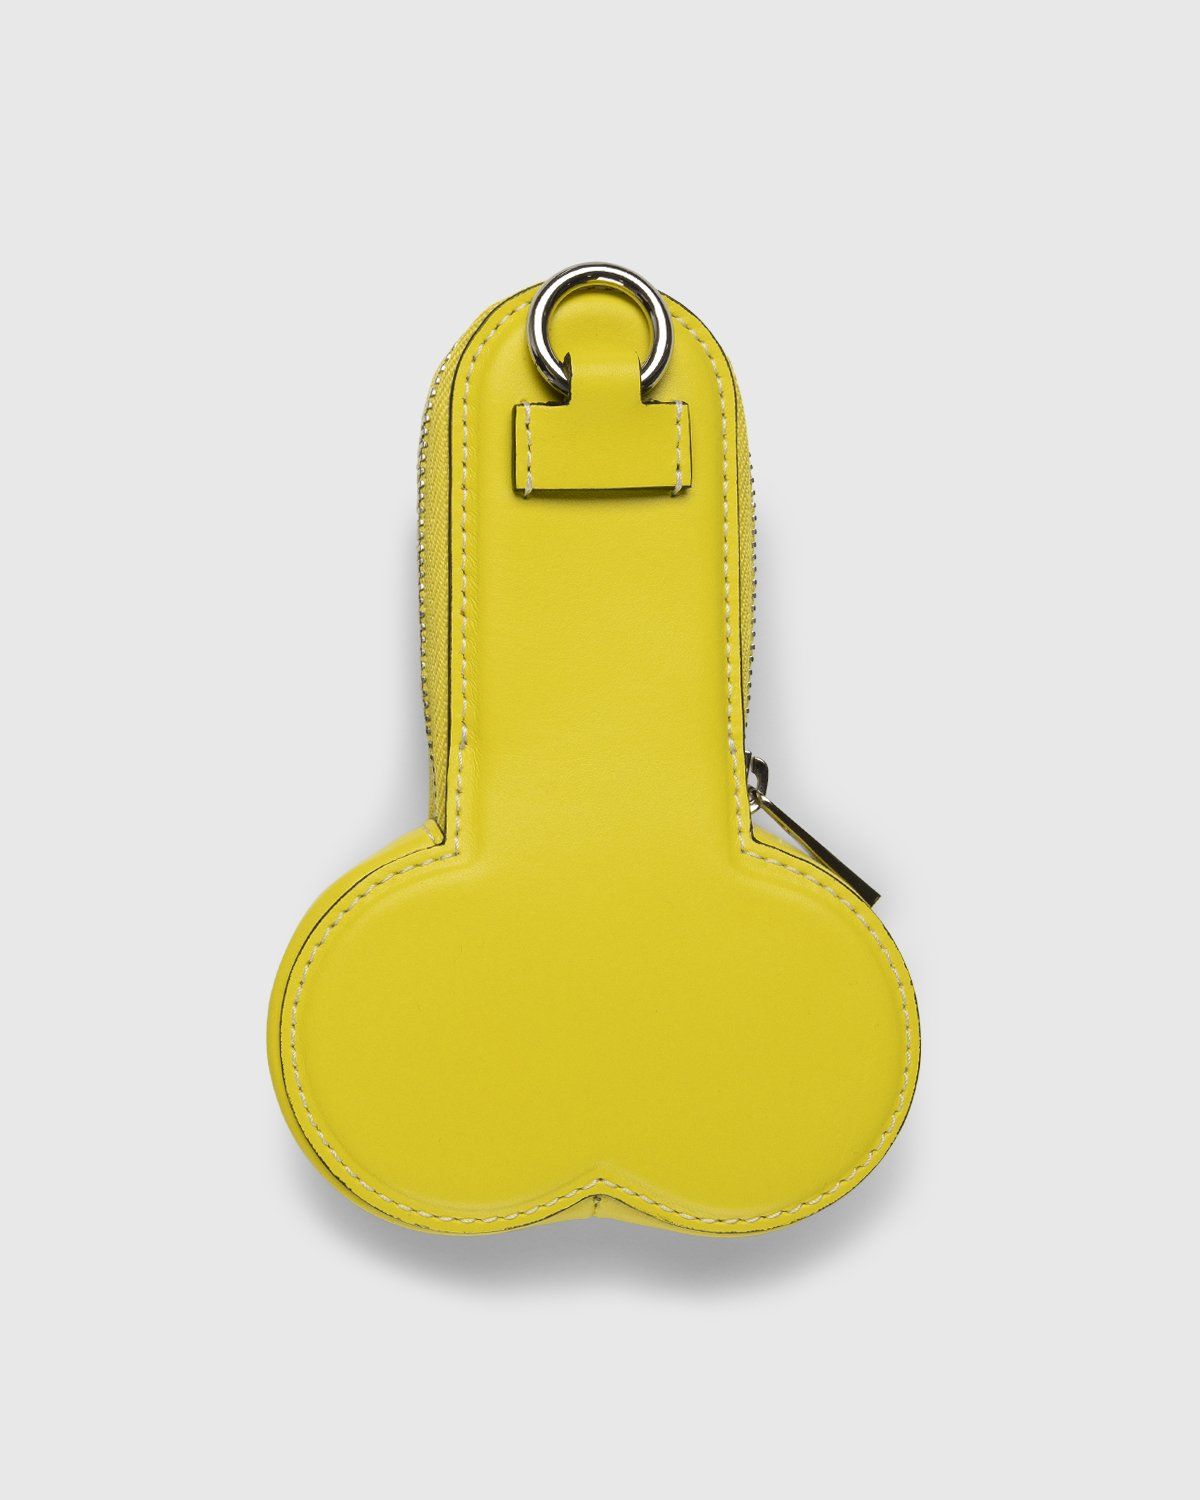 J.W. Anderson – Penis Coin Purse Yellow - Image 5